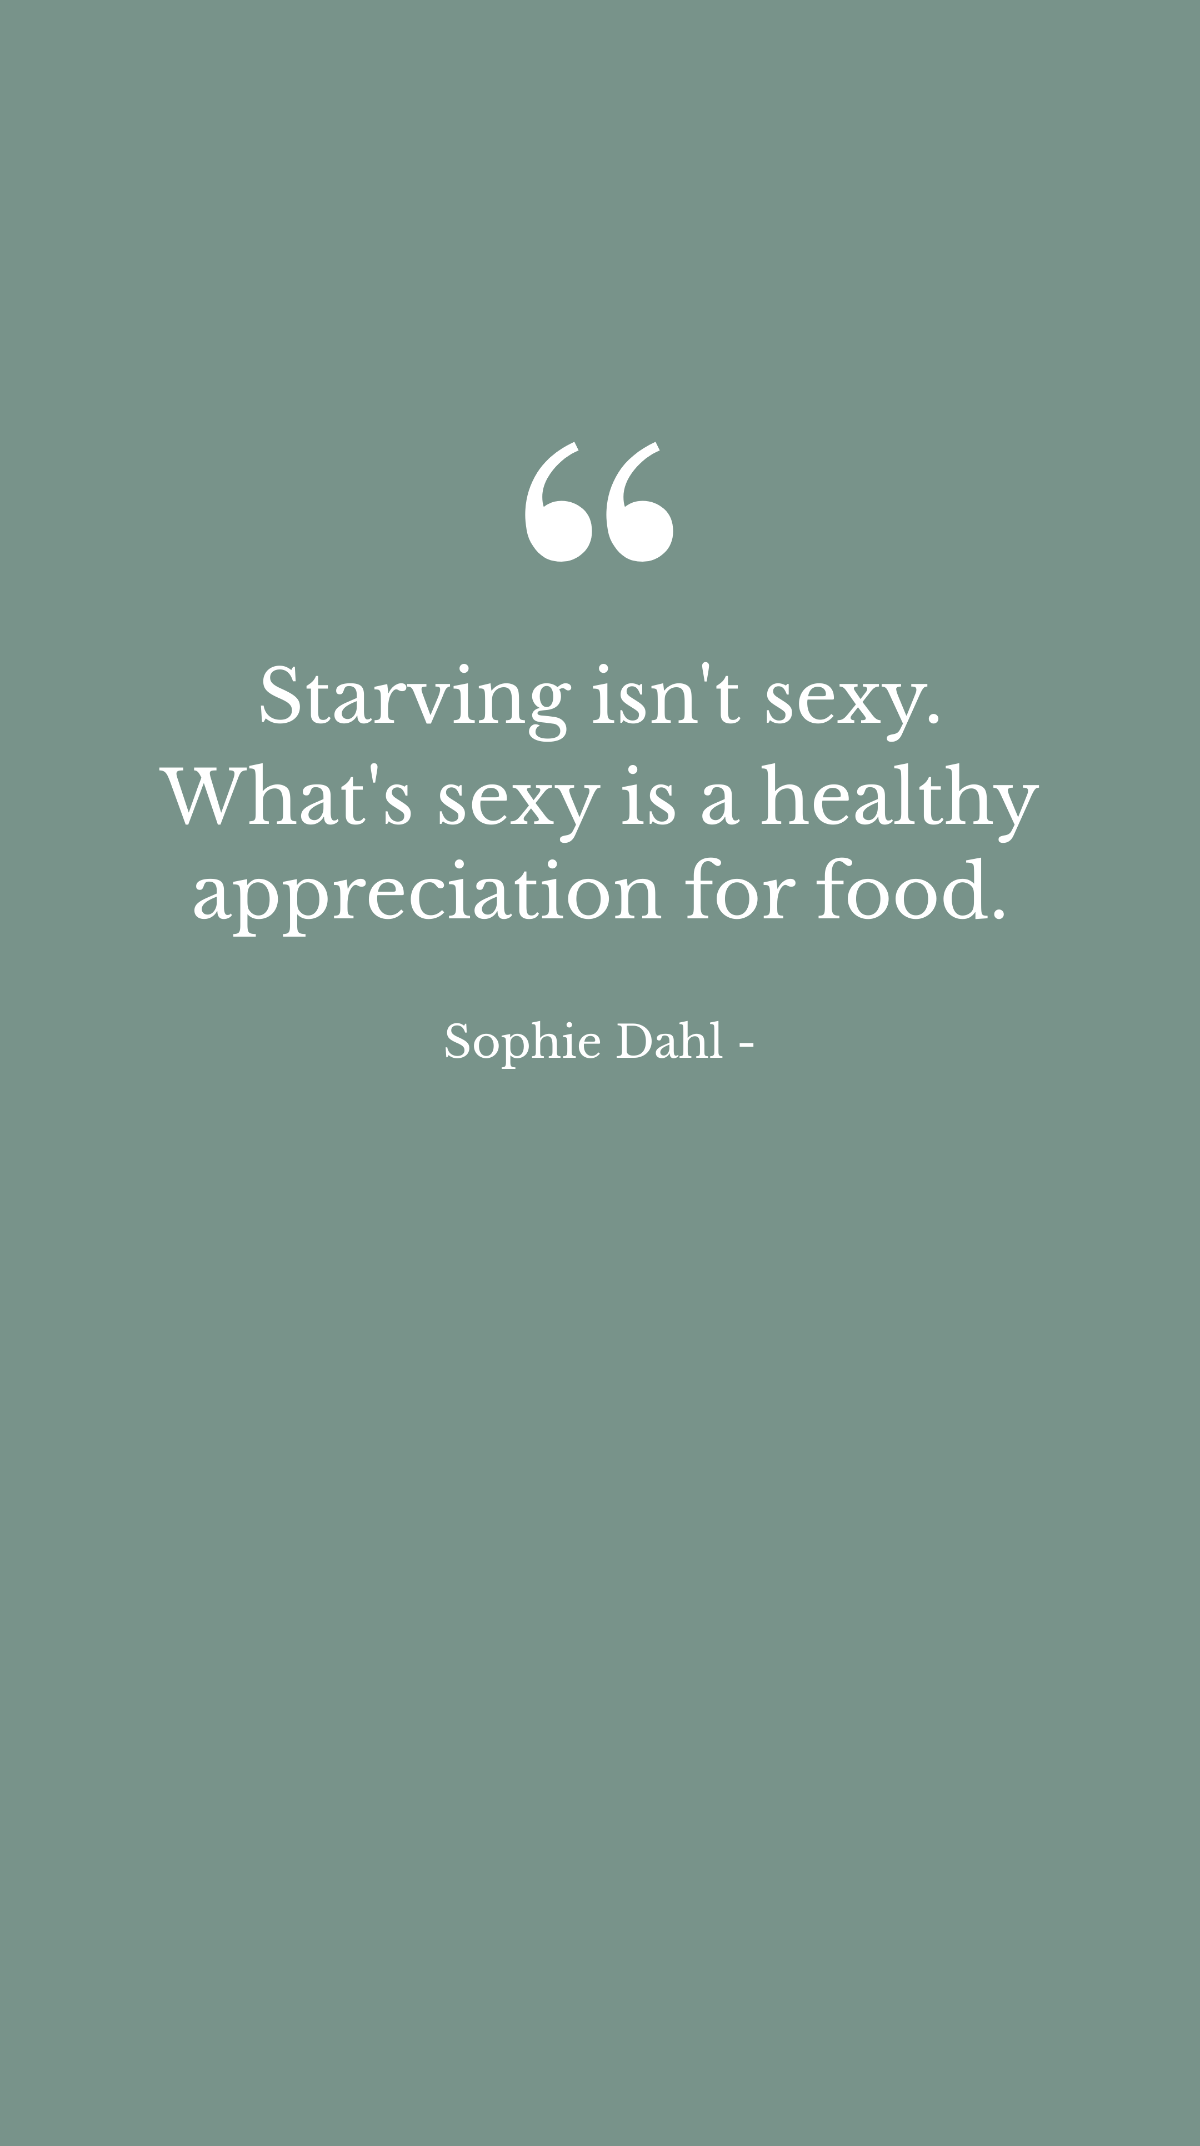 Sophie Dahl - Starving isn't sexy. What's sexy is a healthy appreciation for food. Template